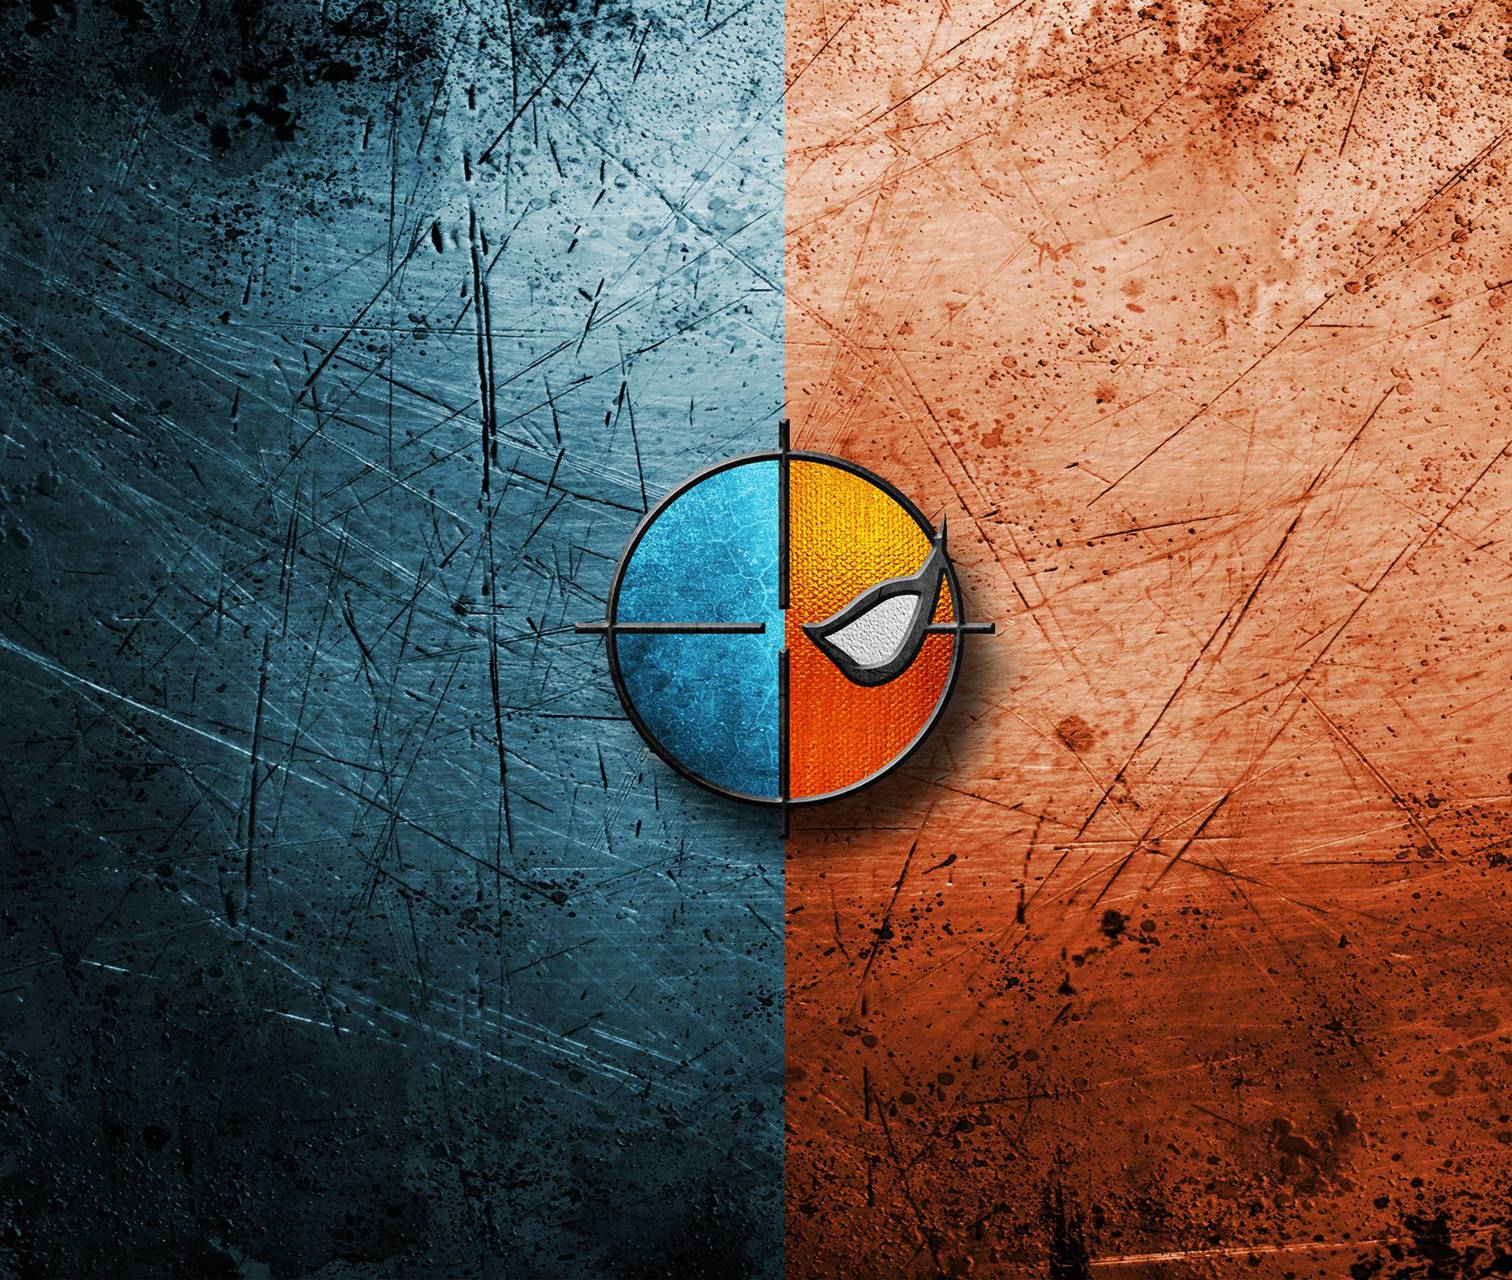 Deathstroke Logo Wallpapers Top Free Deathstroke Logo Backgrounds Wallpaperaccess Matching up deathstroke, the comics version and the tv. deathstroke logo wallpapers top free